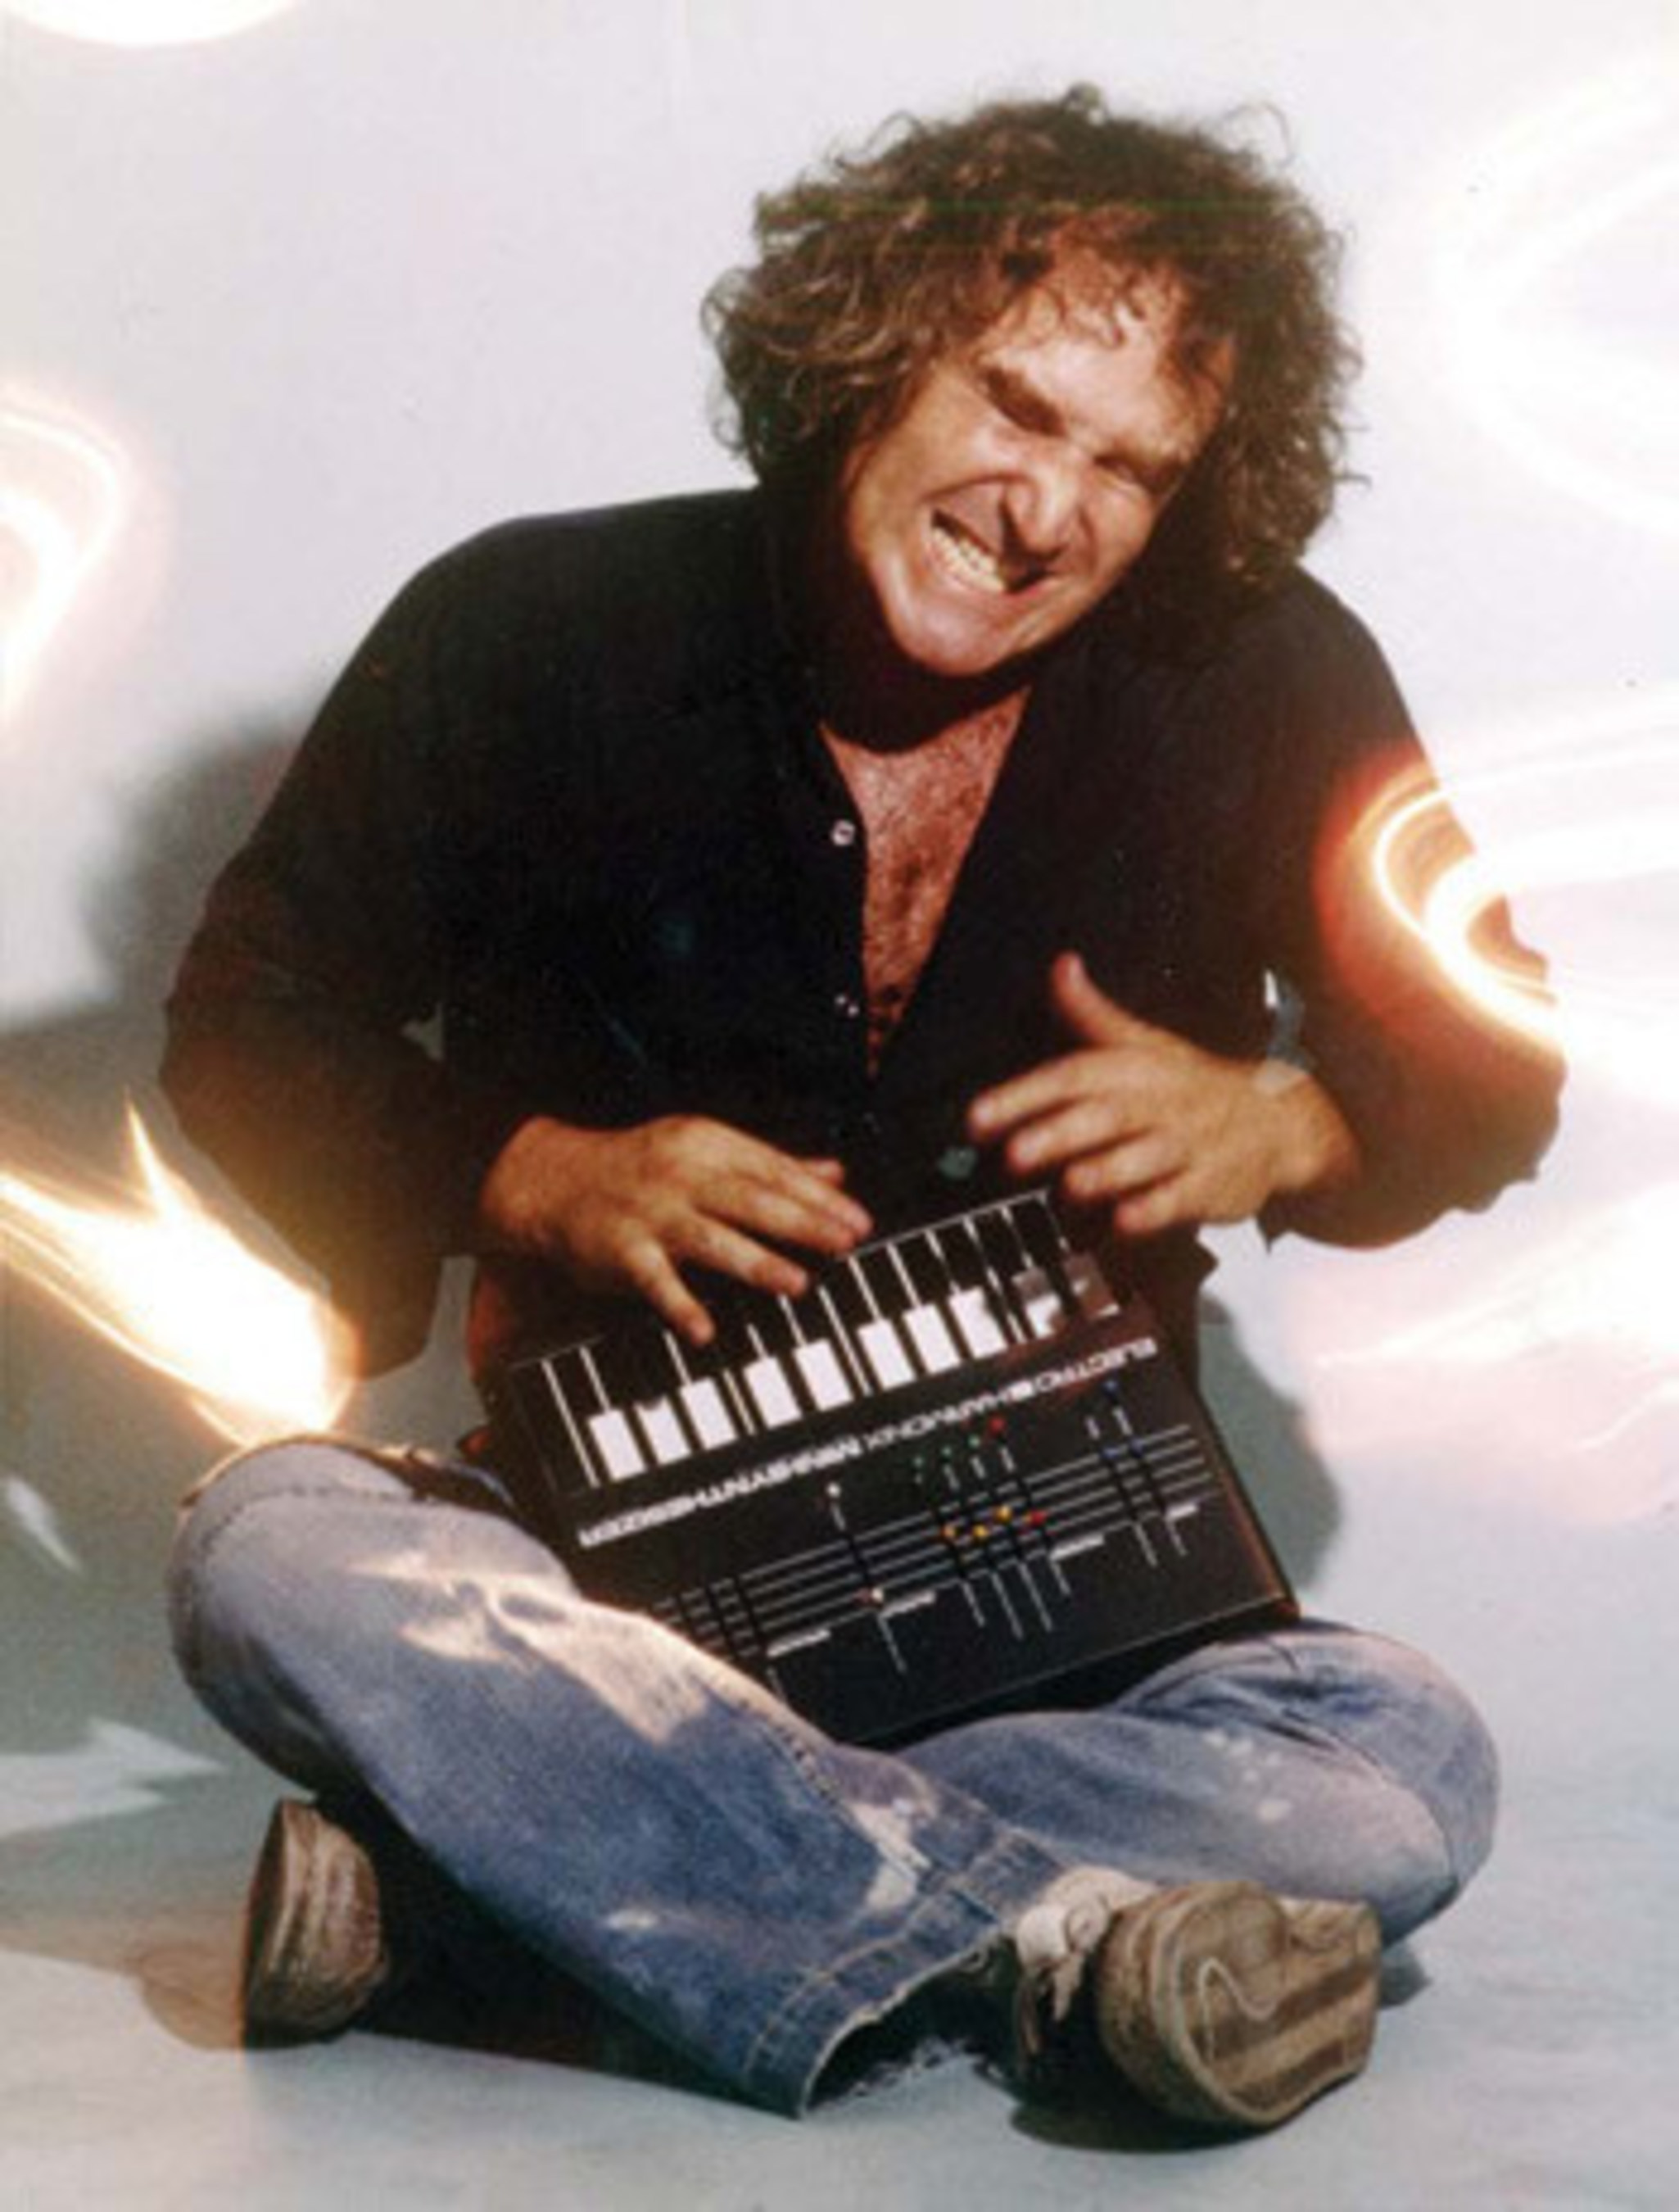 Mike Matthews, Electro-Harmonix President and Founder, pictured with an original Mini-Synthesizer circa 1980. Electro-Harmonix has released a mobile app version of this early electronic synthesizer keyboard.